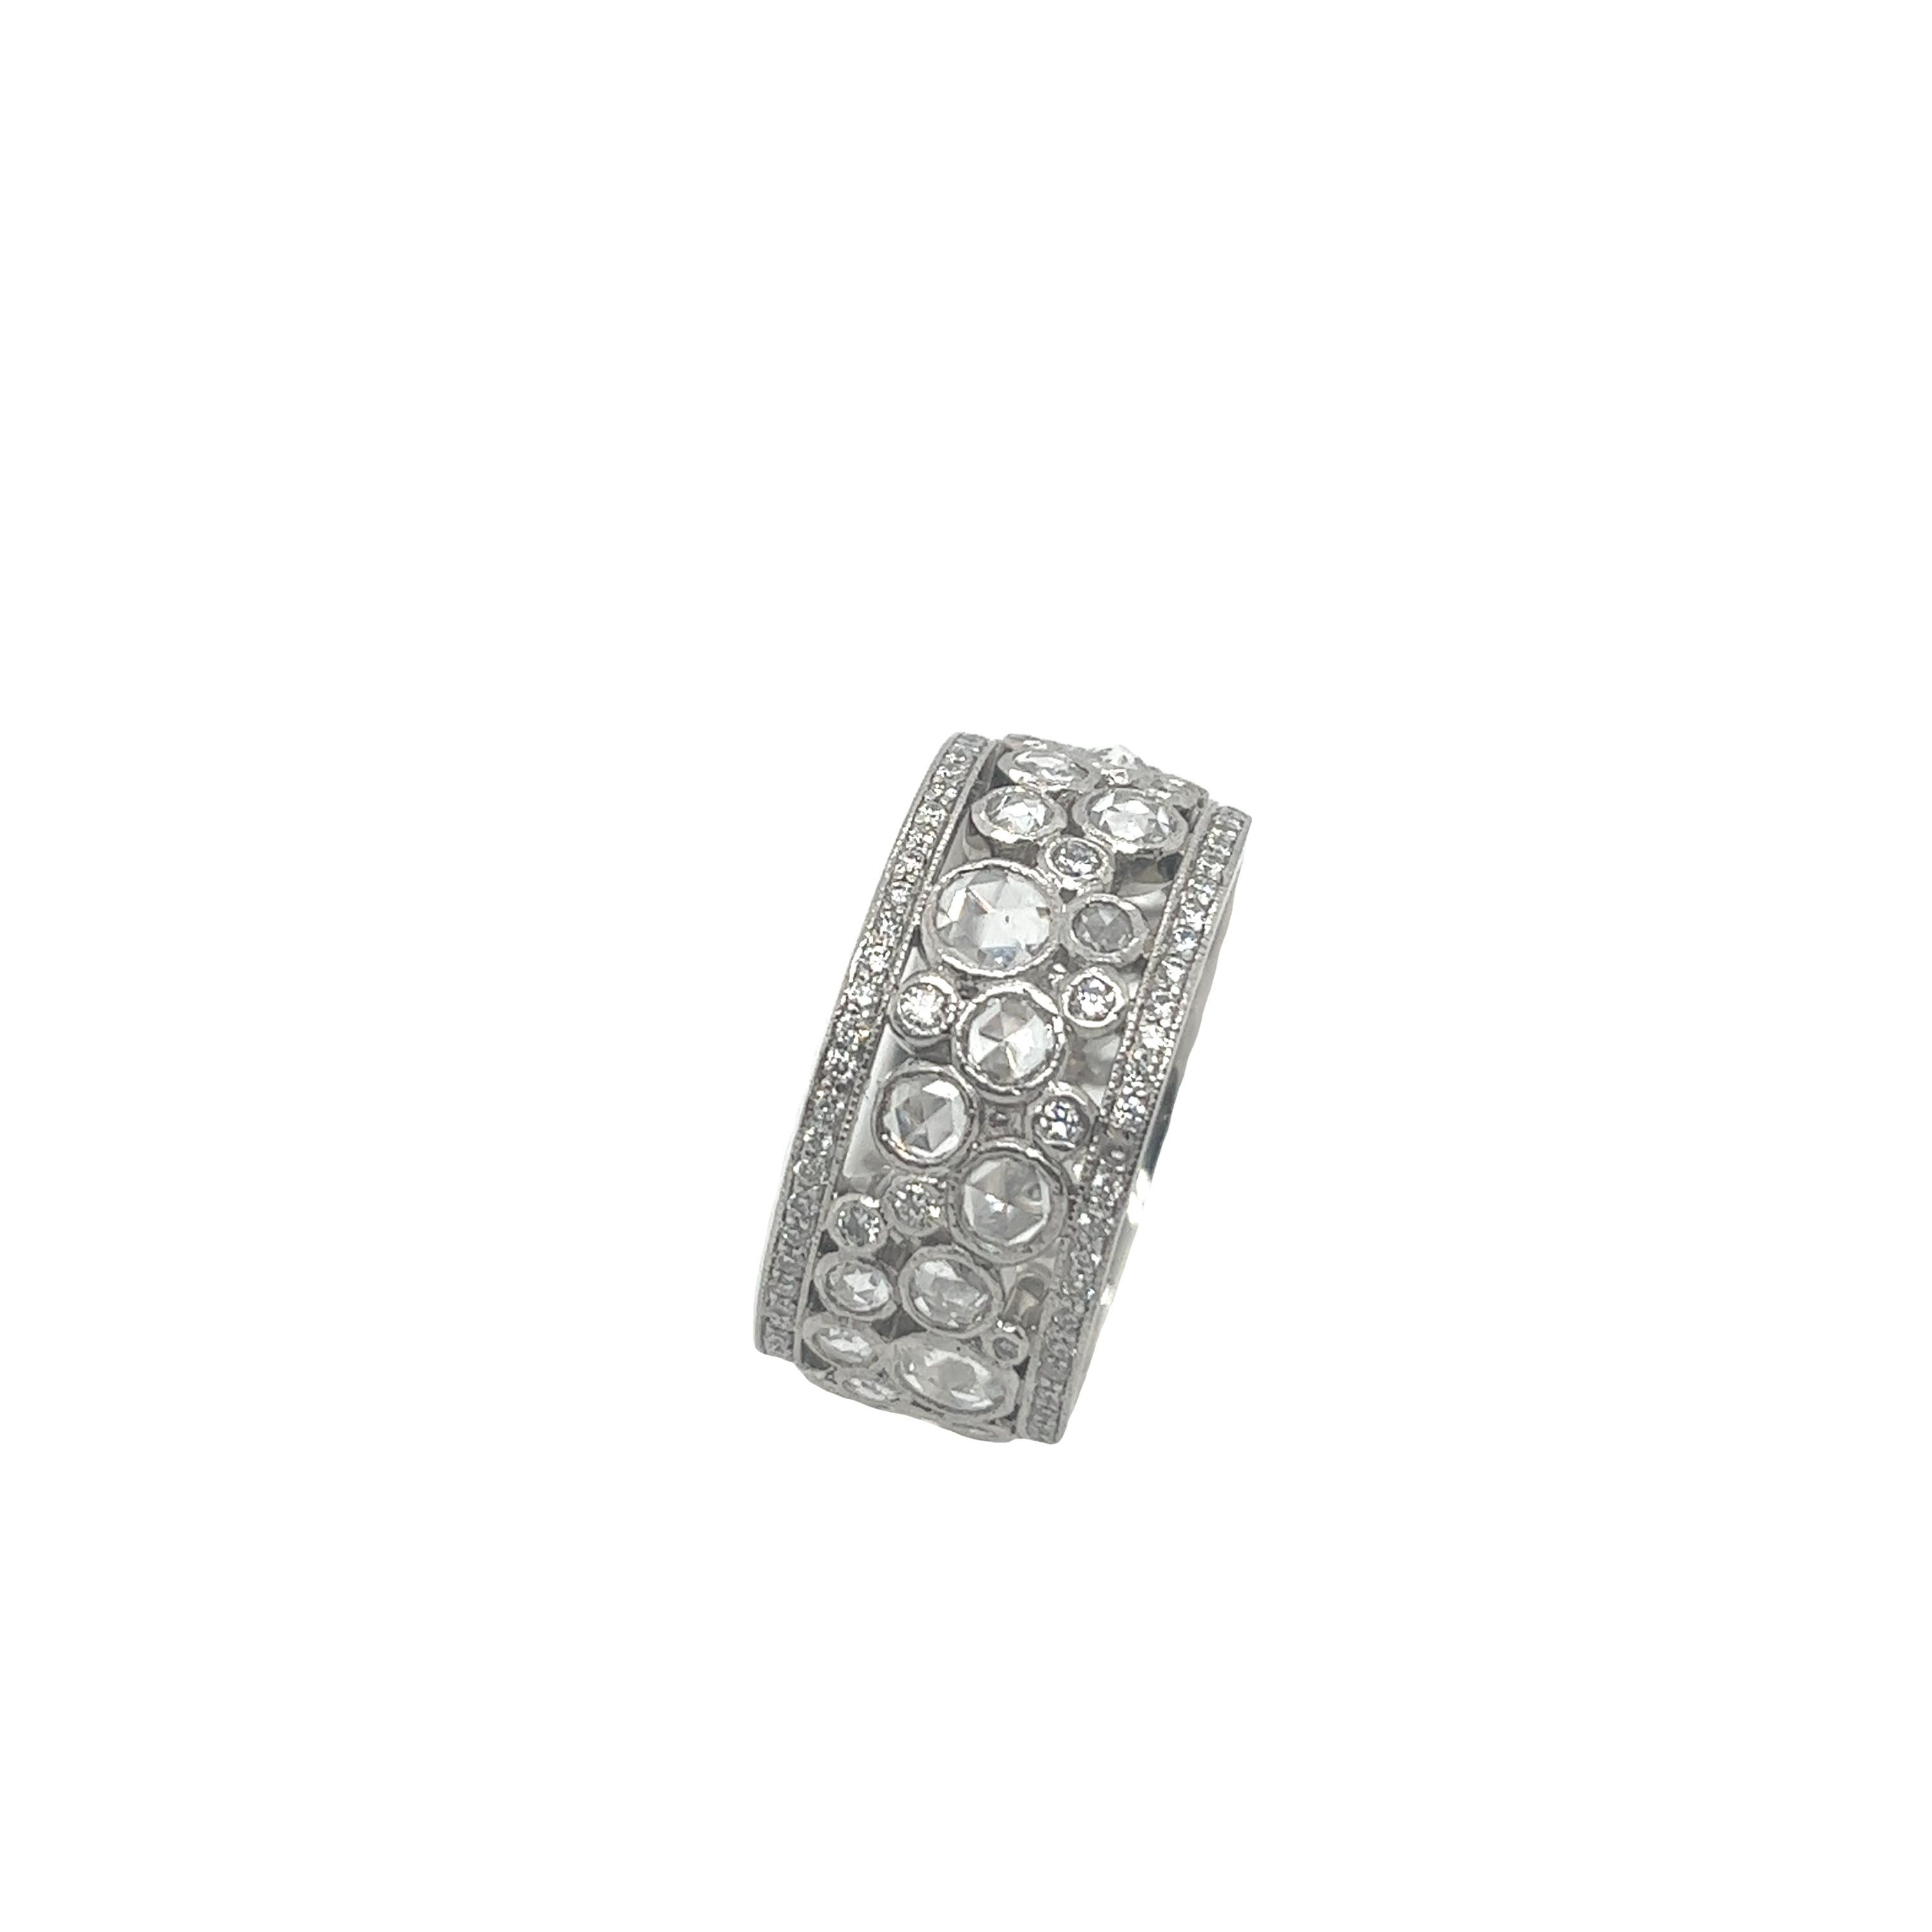 Presenting the stunning pre-loved Tiffany & Co Cobblestone ring, 
in platinum and adorned with a remarkable collection of diamonds. 
This exquisite ring, with a width of 10mm, offers a bold and fashionable statement.
Featuring approximately 2.10